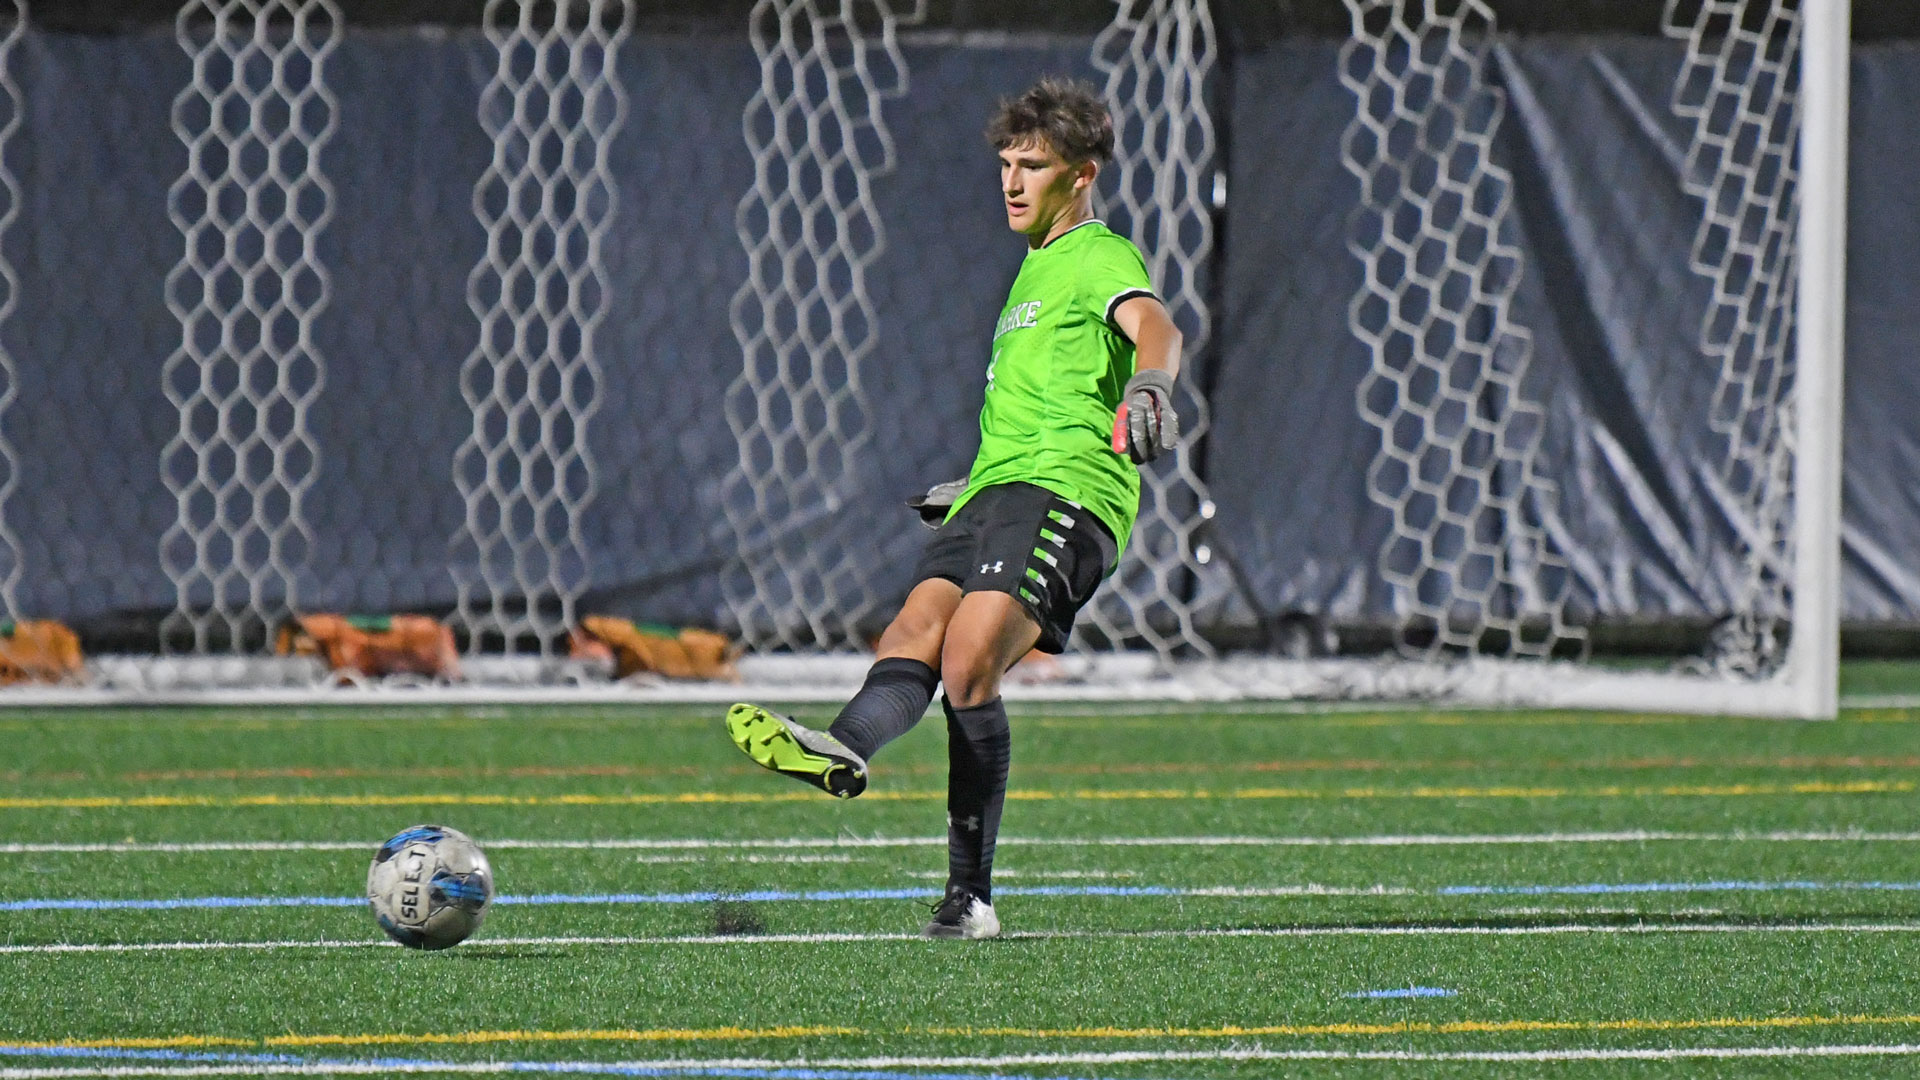 Pride post third-straight shutout, open conference play with 1-0 win over Graceland